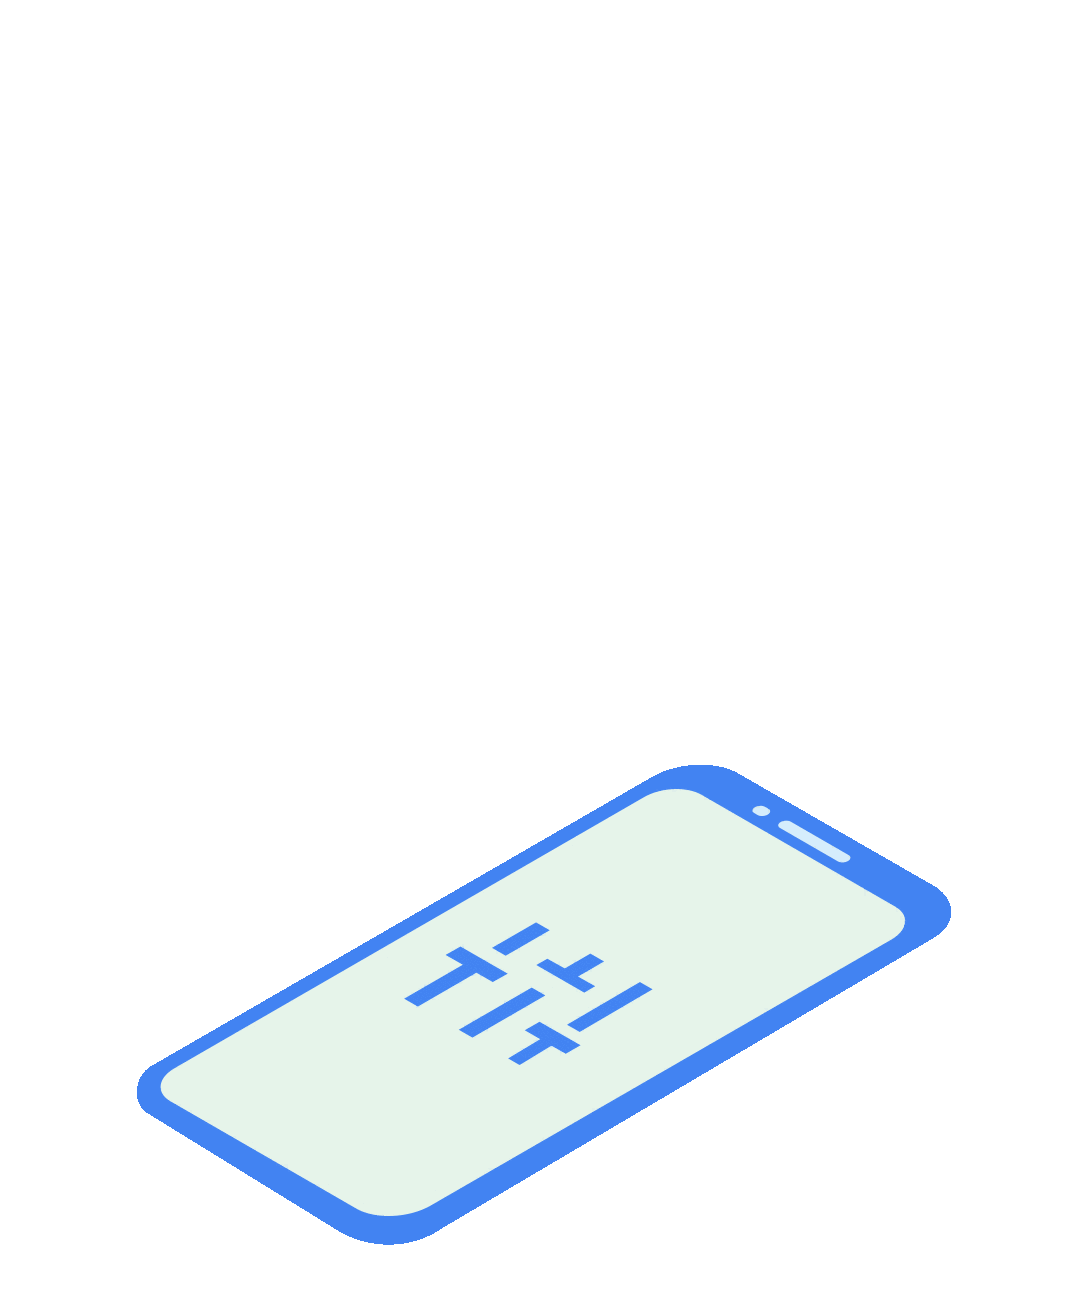 Animation depicting multiple layers of security on an Android device.